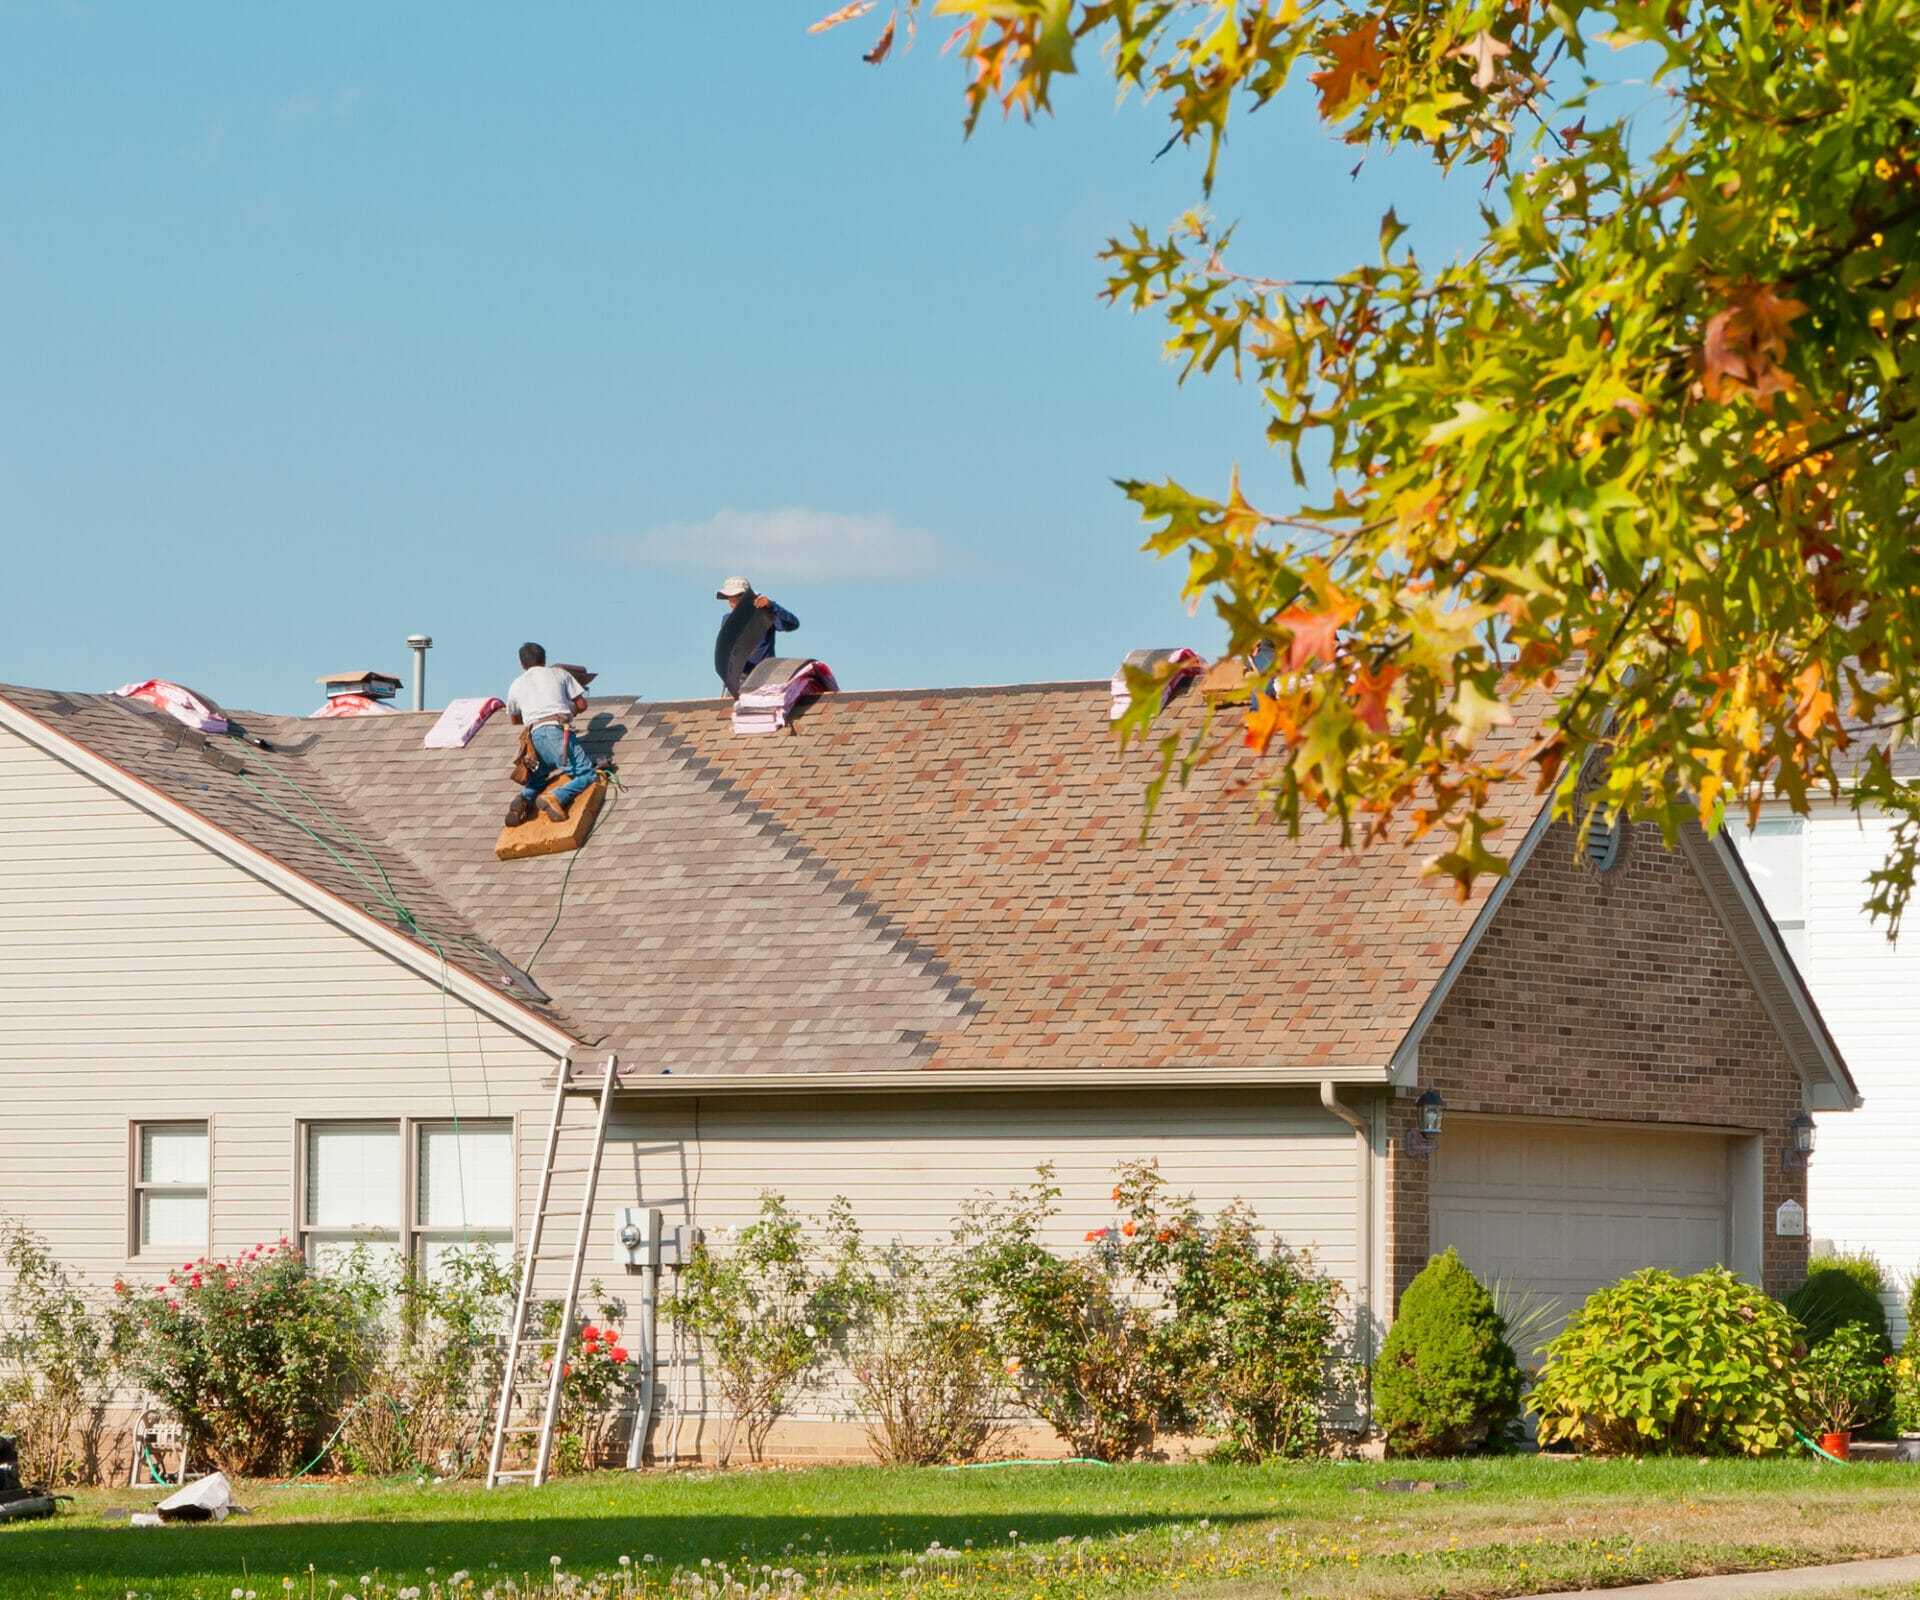 Preventative Roofing Safety Tips You Should Know